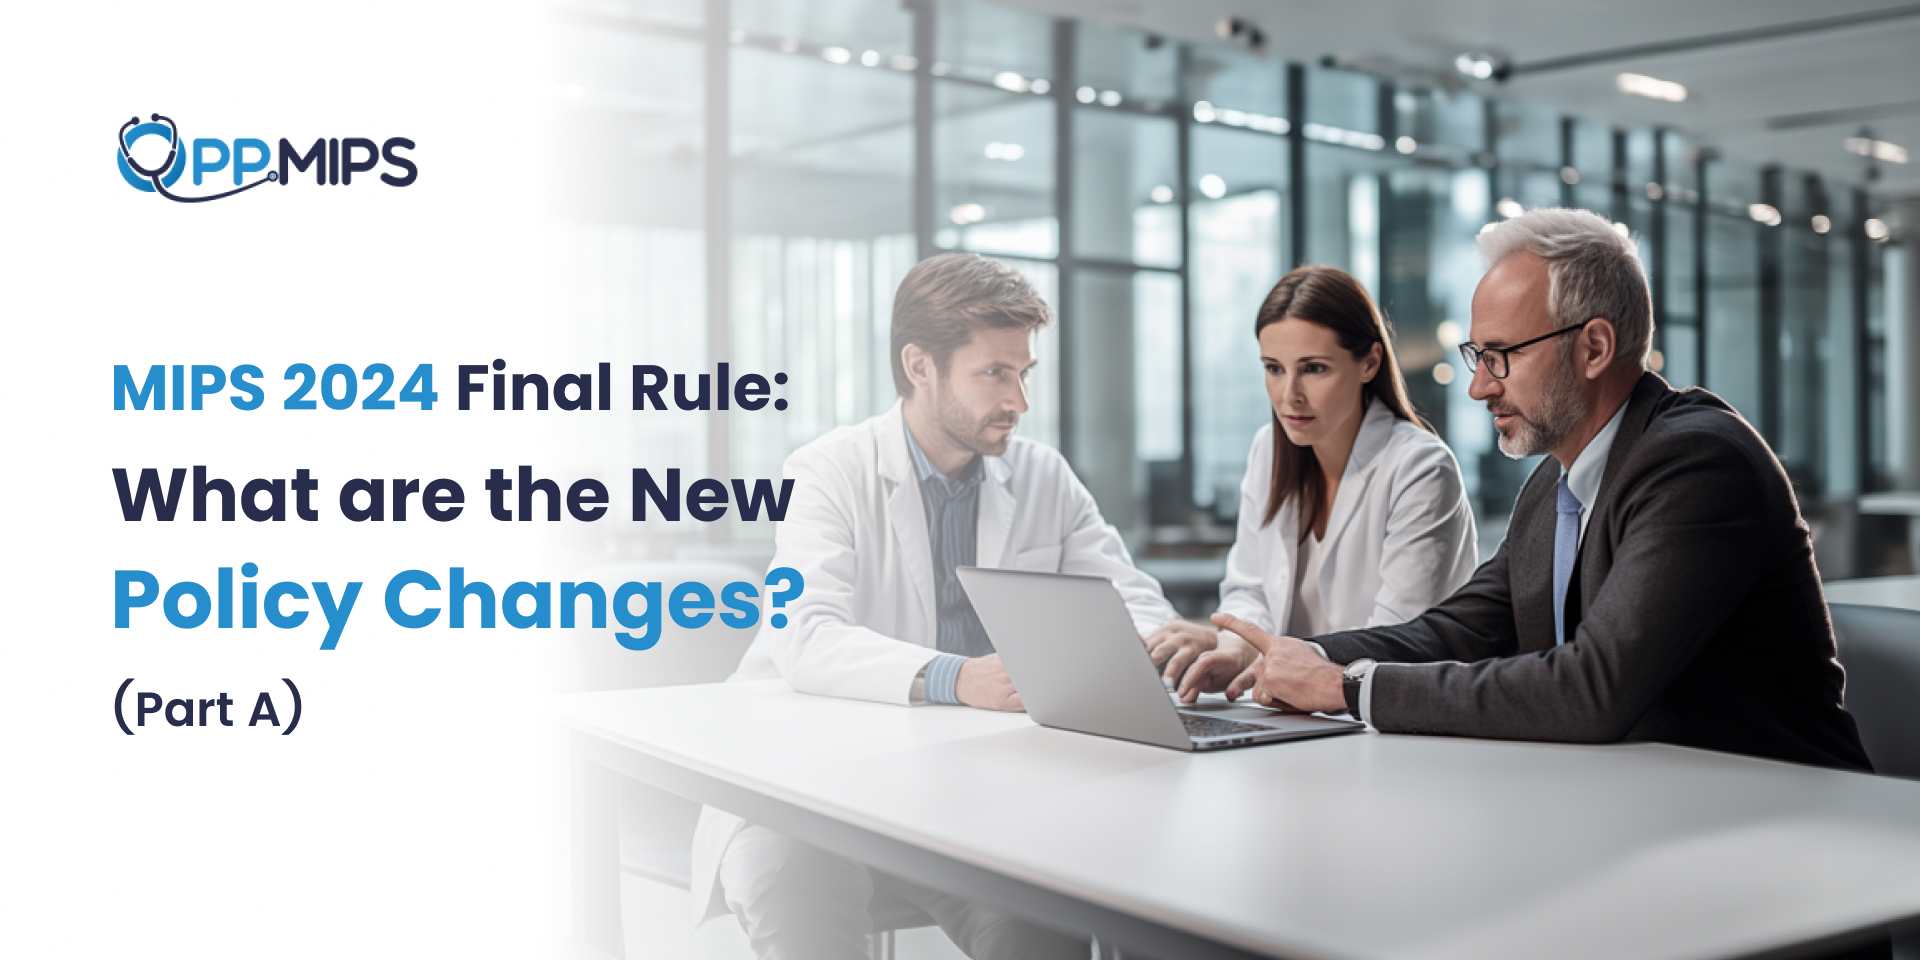 MIPS 2024 Final Rule: What are the New Policy Changes?